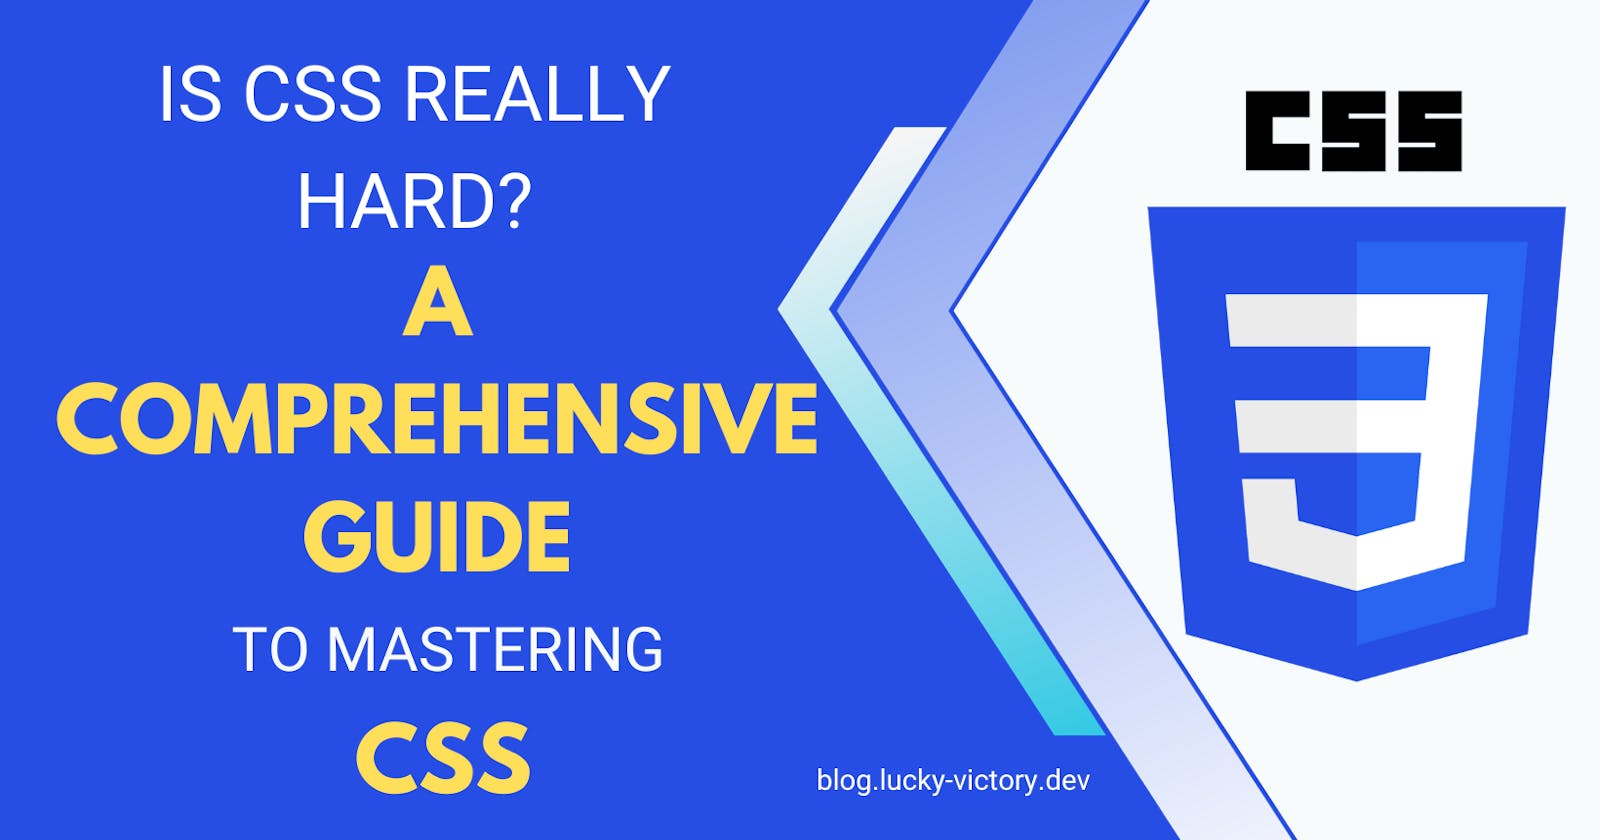 Is CSS Really Hard? A Comprehensive Guide to Mastering CSS